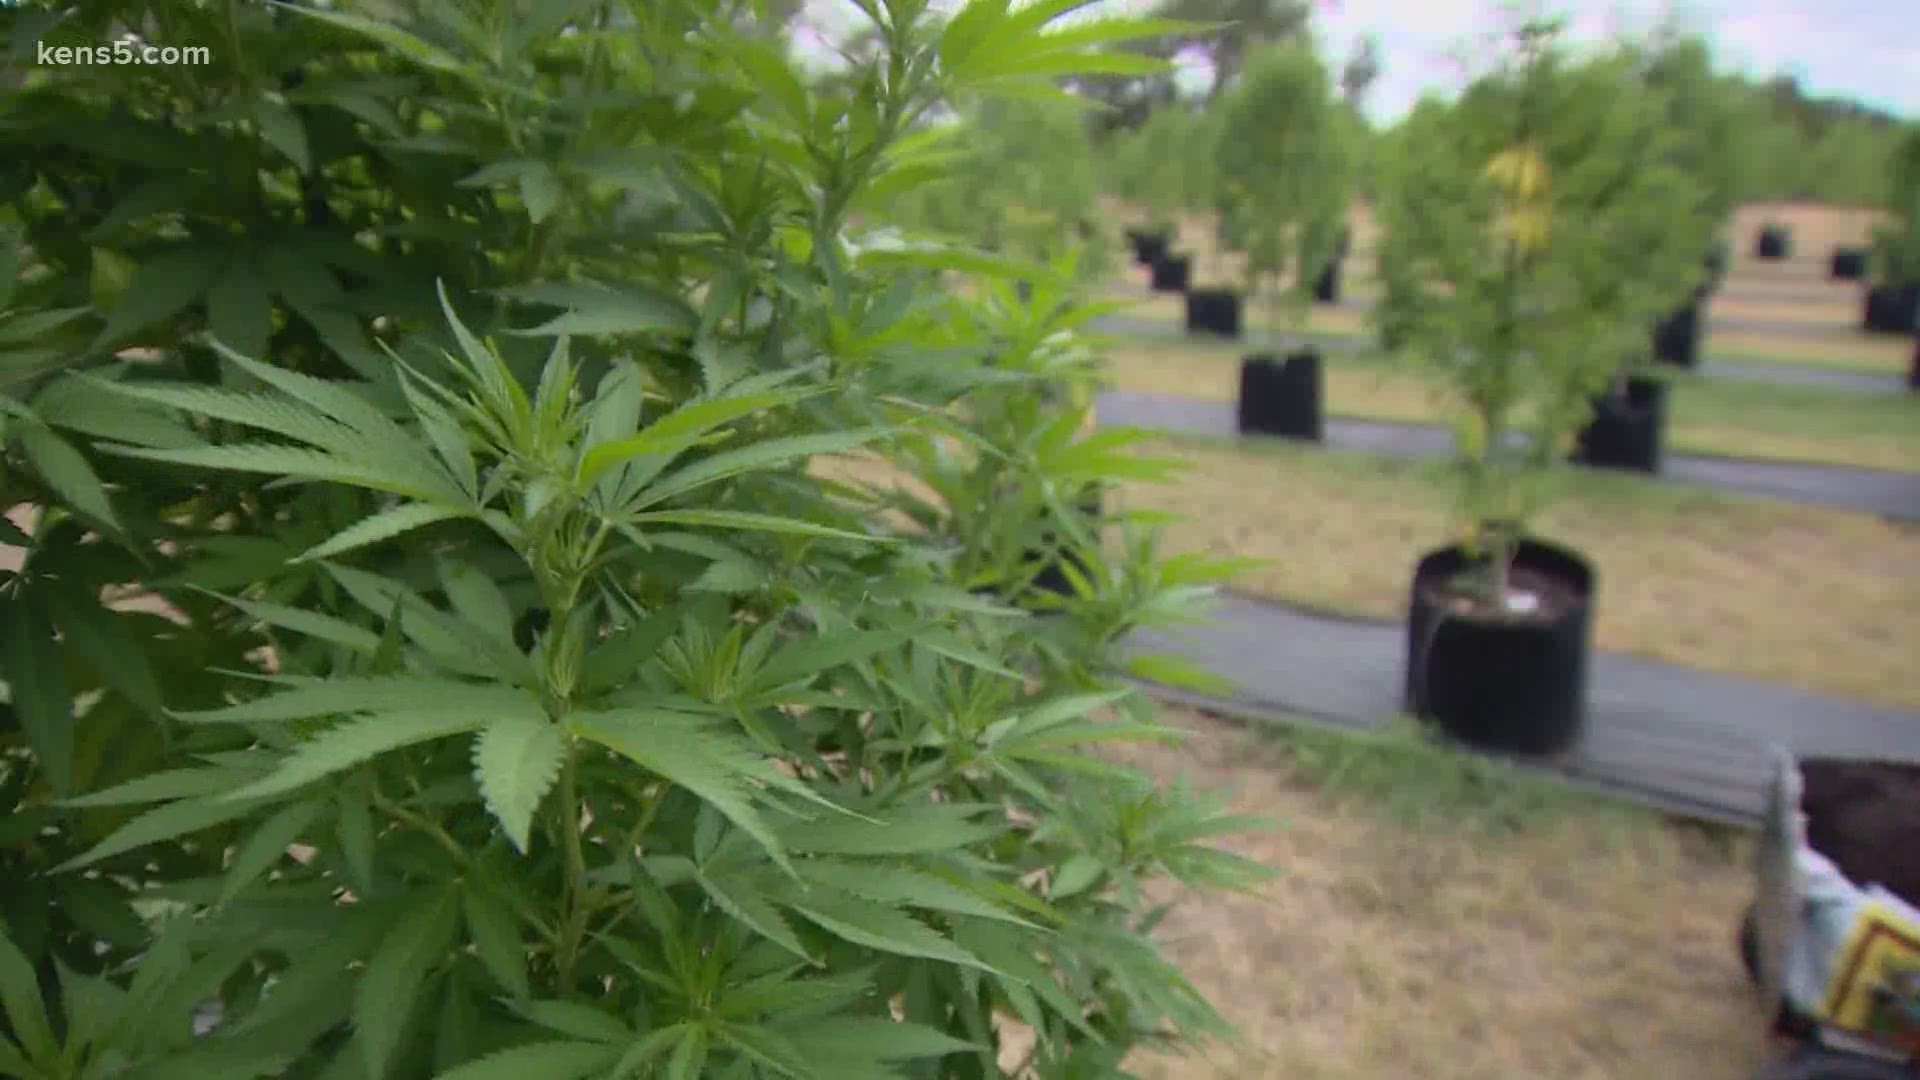 Texas lawmakers gave the green light to grow hemp  last year.  The owners of Pur IsoLabs said their farm is growing hemp, and it’s the first of it’s kind in Texas.